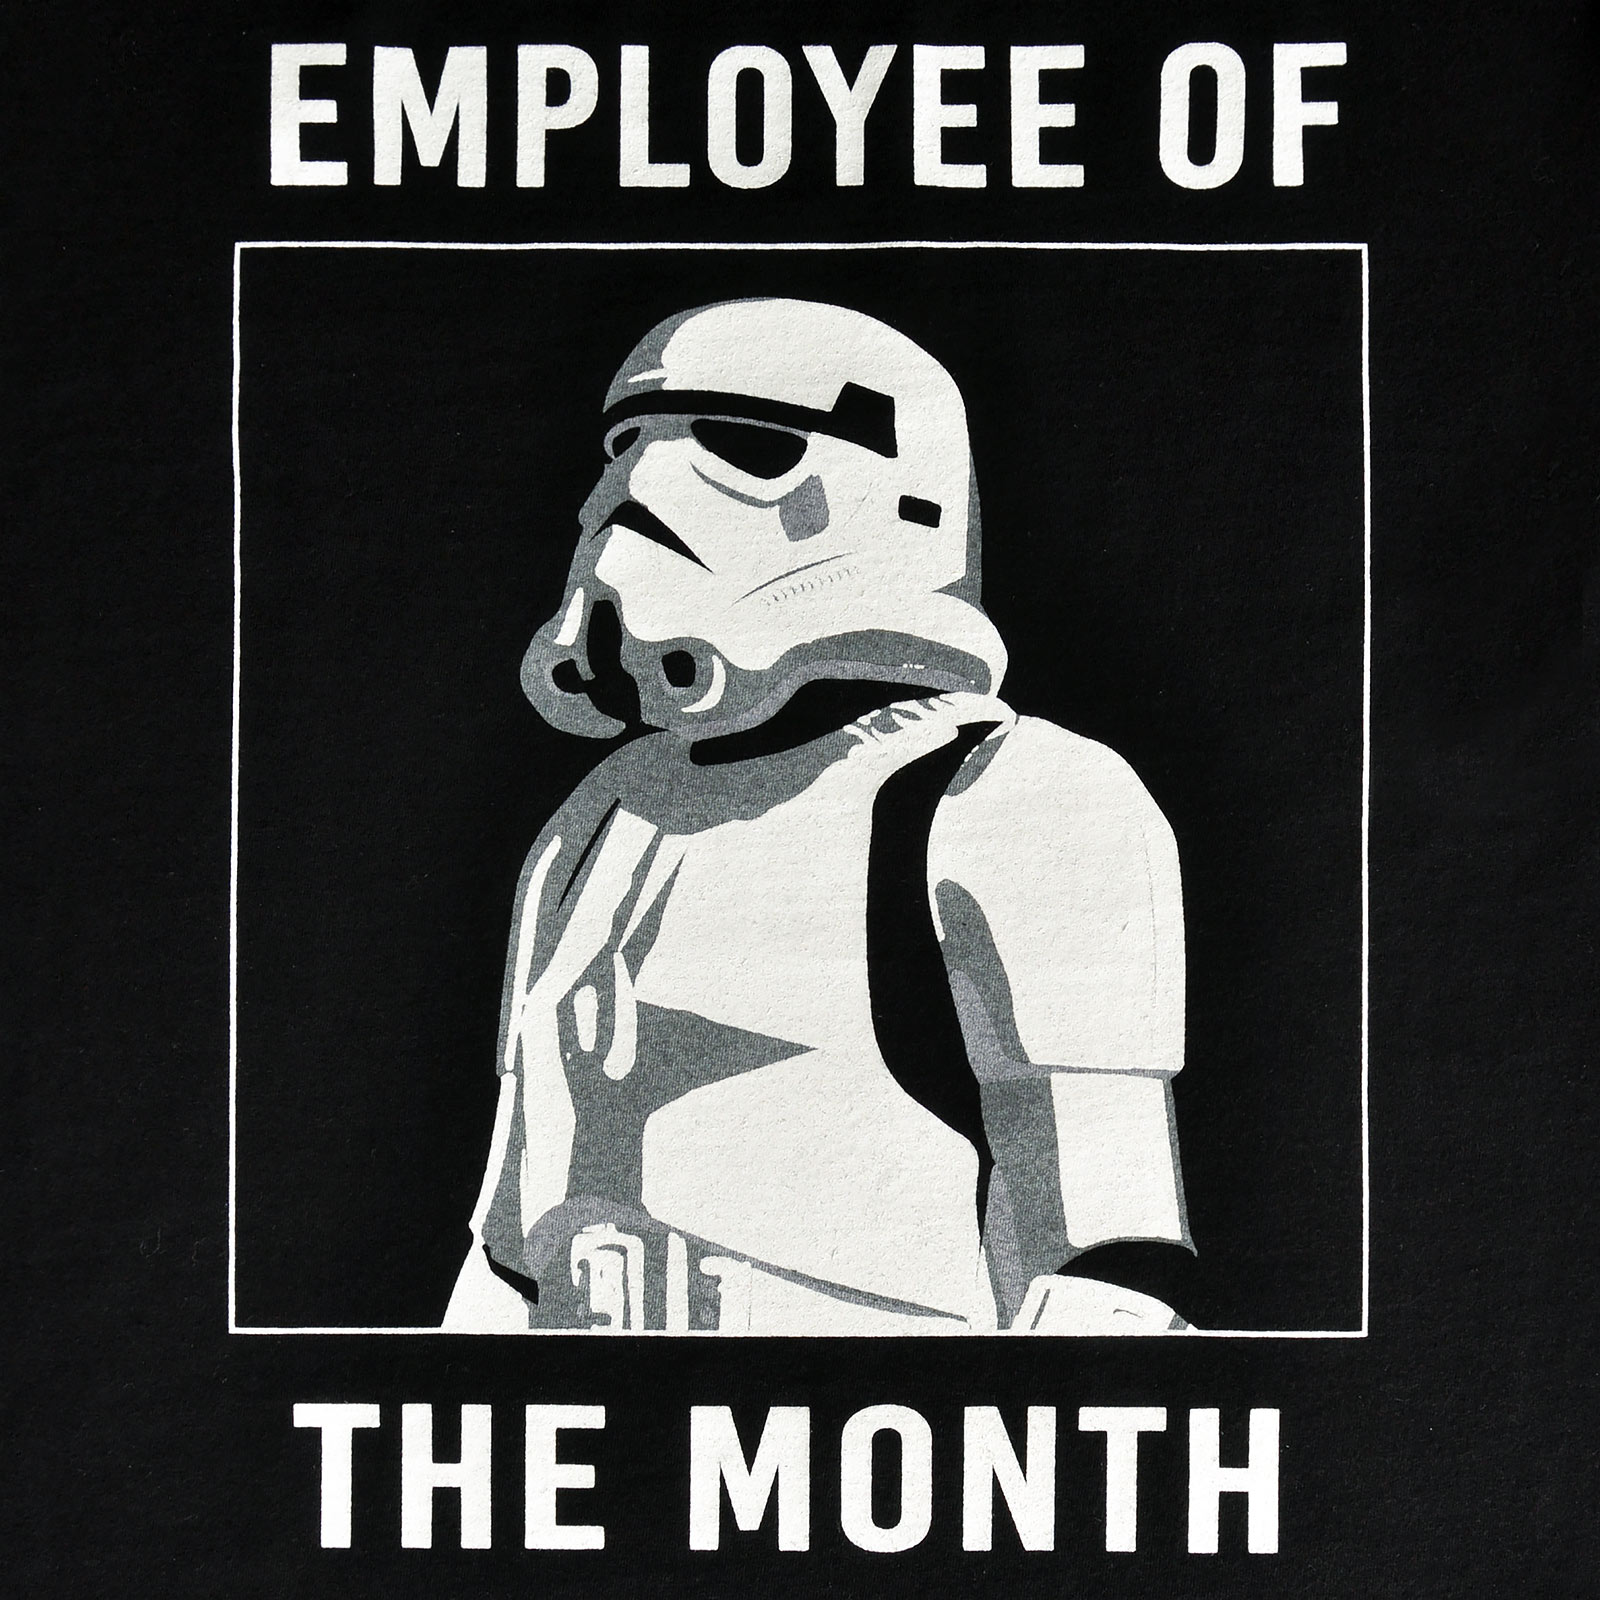 Star Wars - Stormtrooper Employee of the Month T-Shirt Black